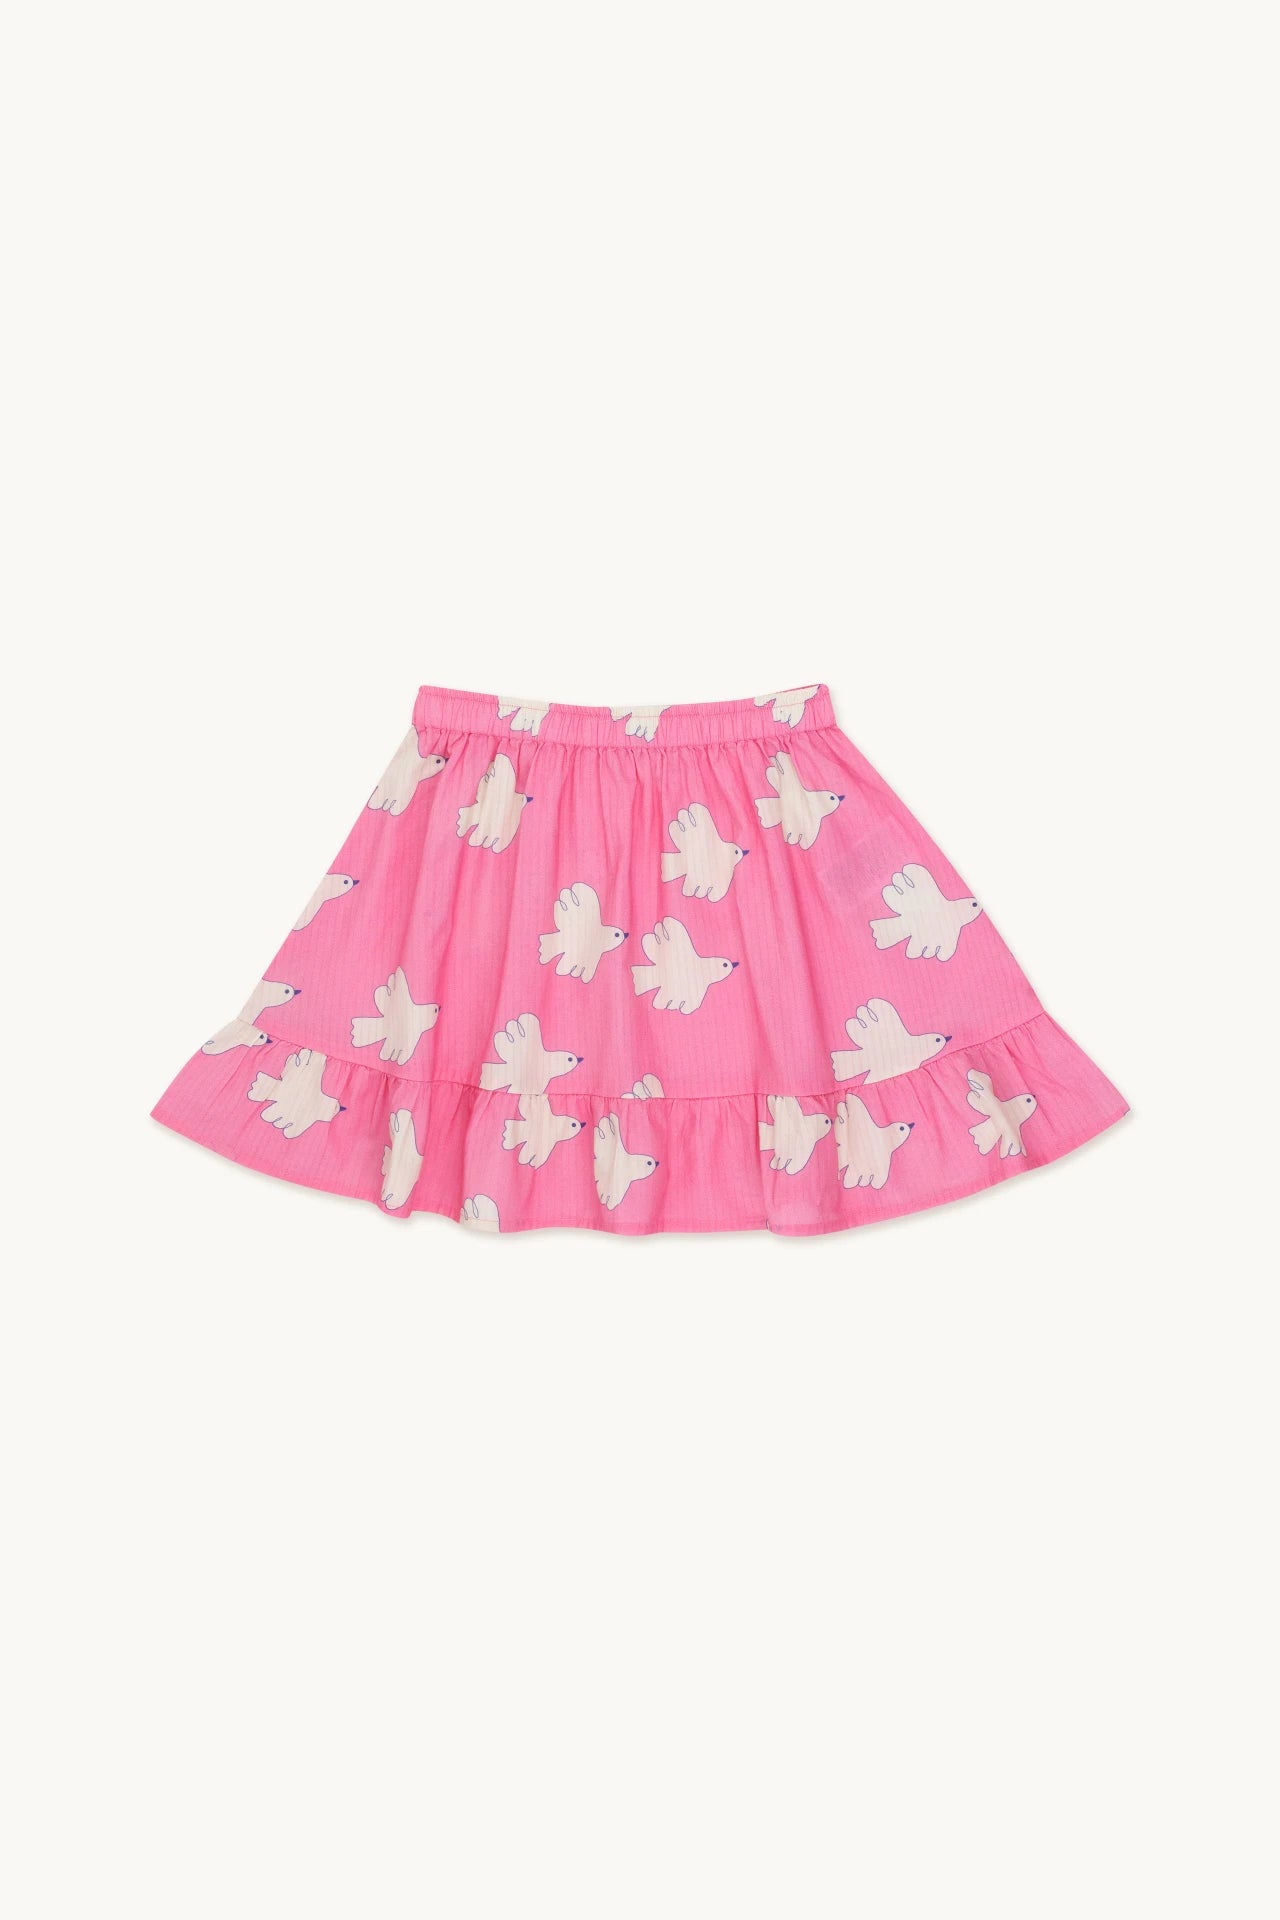 Tinycottons doves skirt